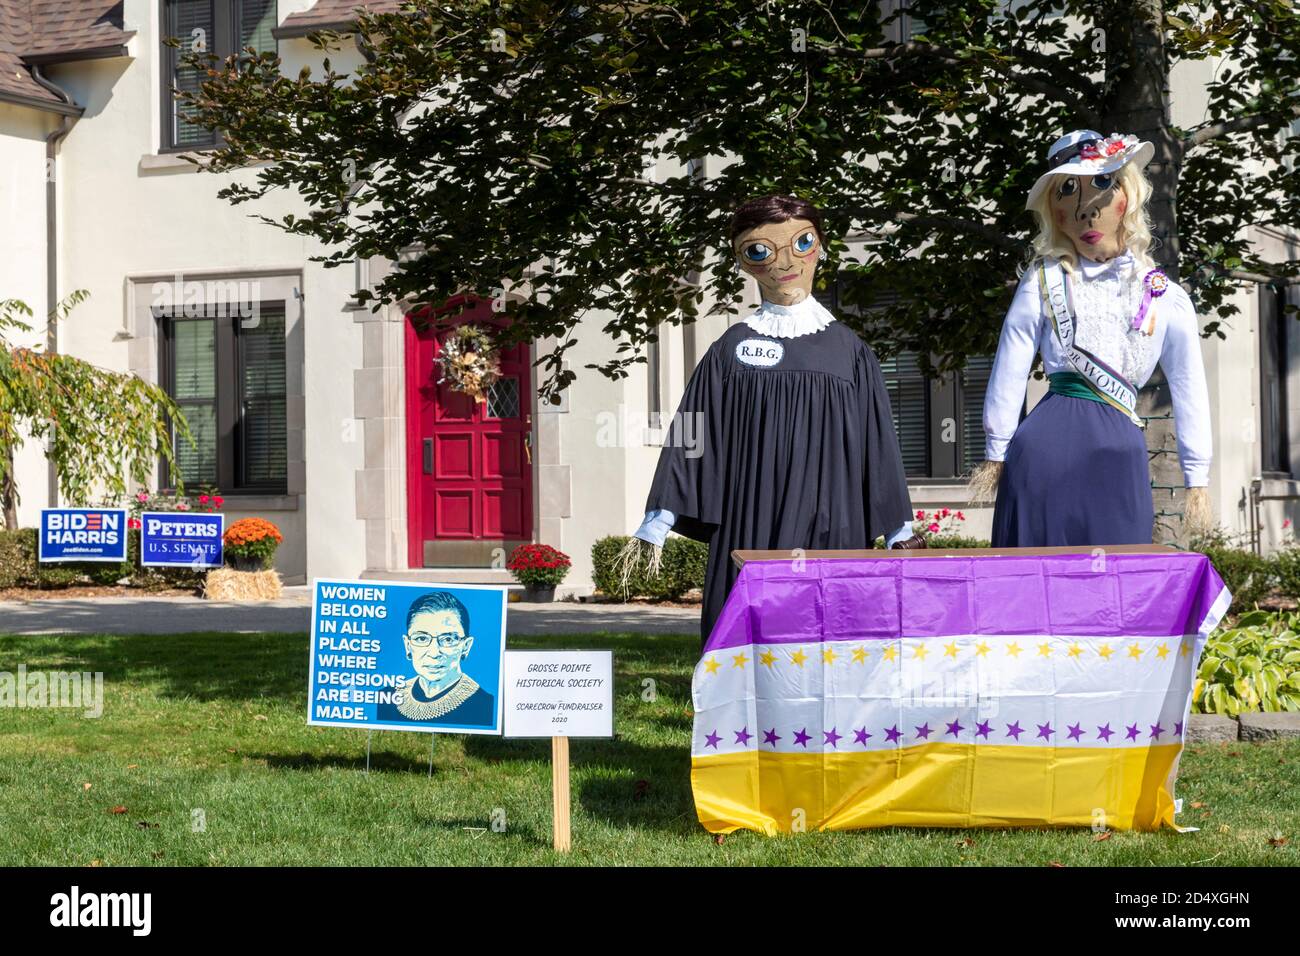 Grosse Pointe, Michigan, USA. 11th Oct, 2020. Representations of Ruth Bader Ginsburg and a suffragette on the lawn of a home weeks before the 2020 presidential election. The 19th Amendment was ratified 100 years ago, giving women the right to vote. Credit: Jim West/Alamy Live News Stock Photo